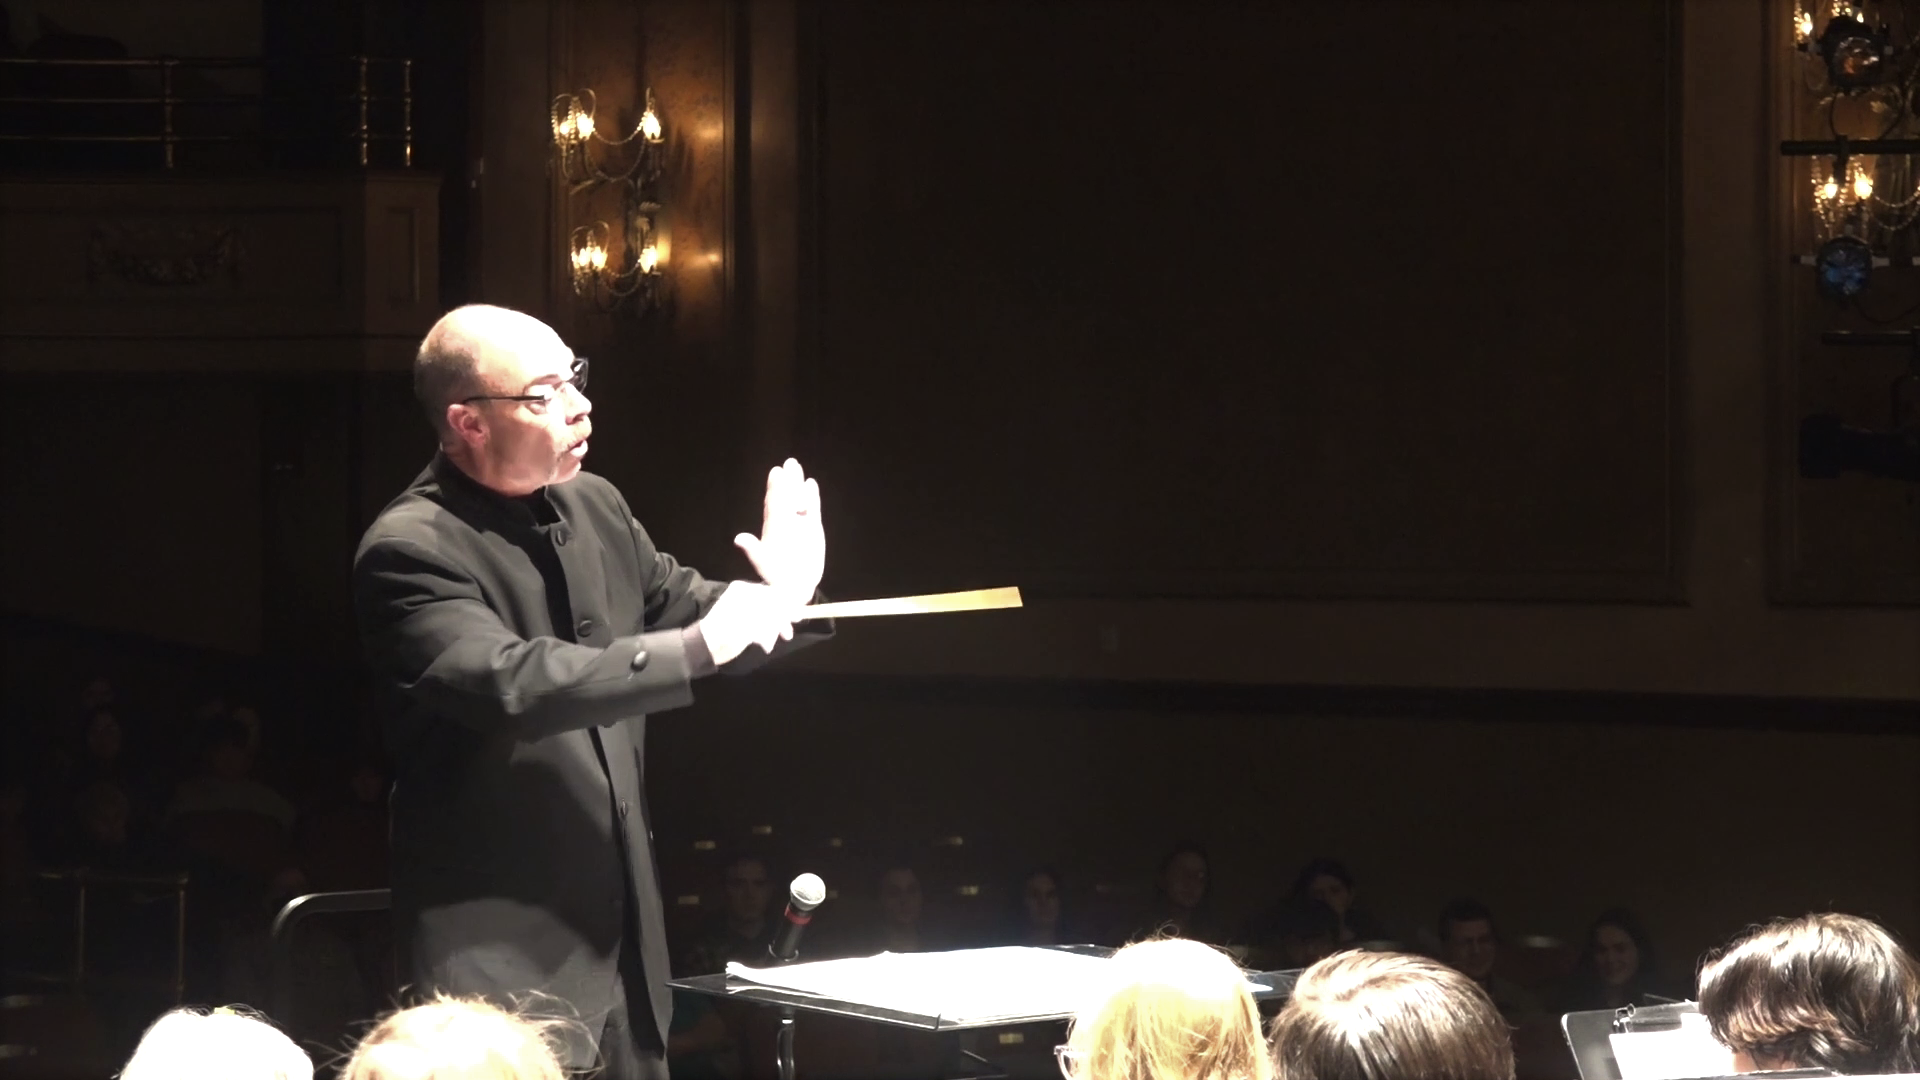 Professor Russell McCutcheon conducting on stage